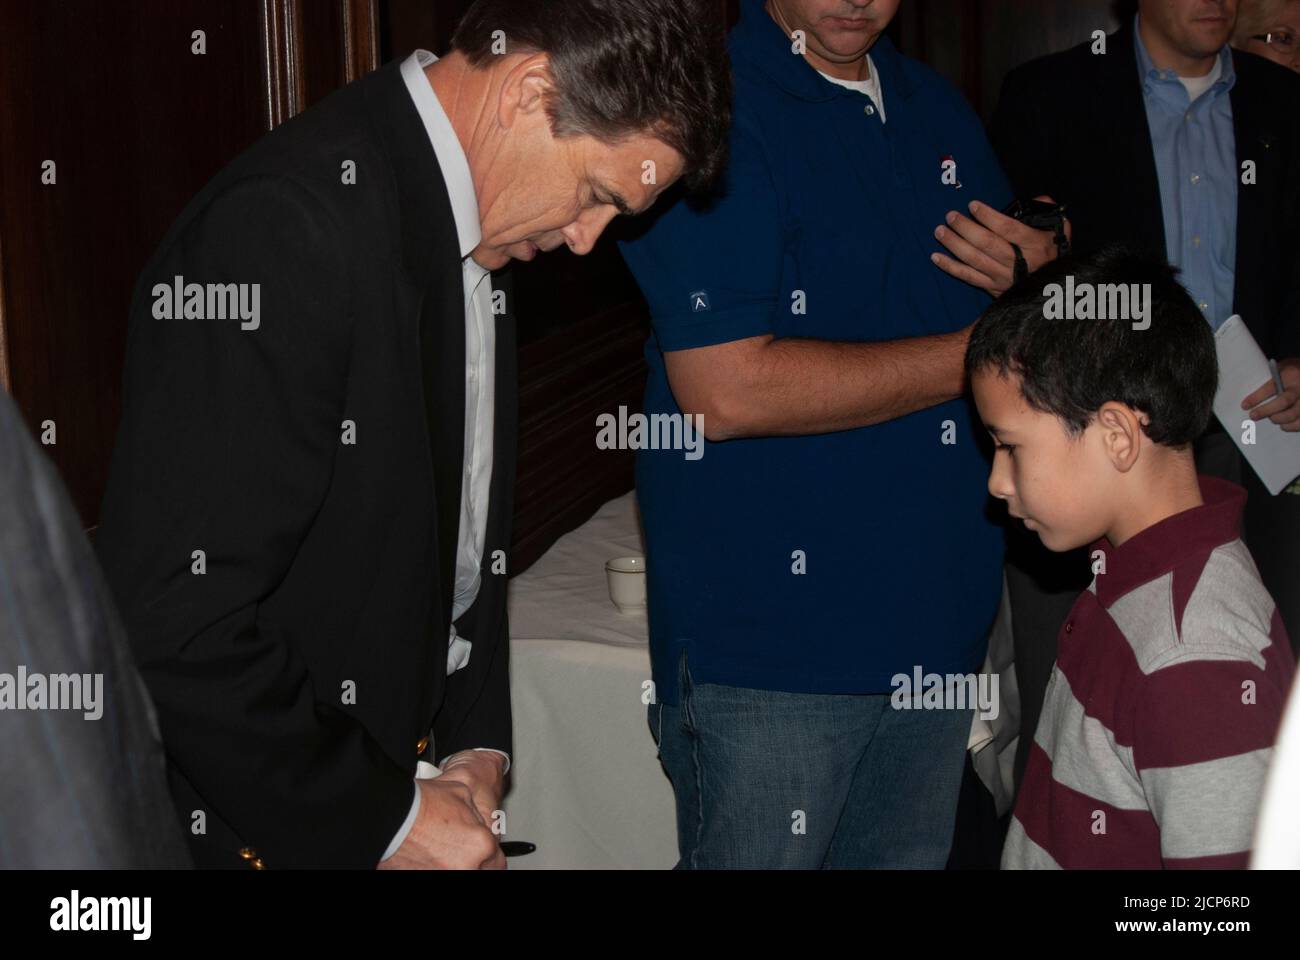 Texas Governor Rick Perry signing autographs at an election event at Maggiano's Italian Restaurant in Dallas Texas (North Park Center) Stock Photo